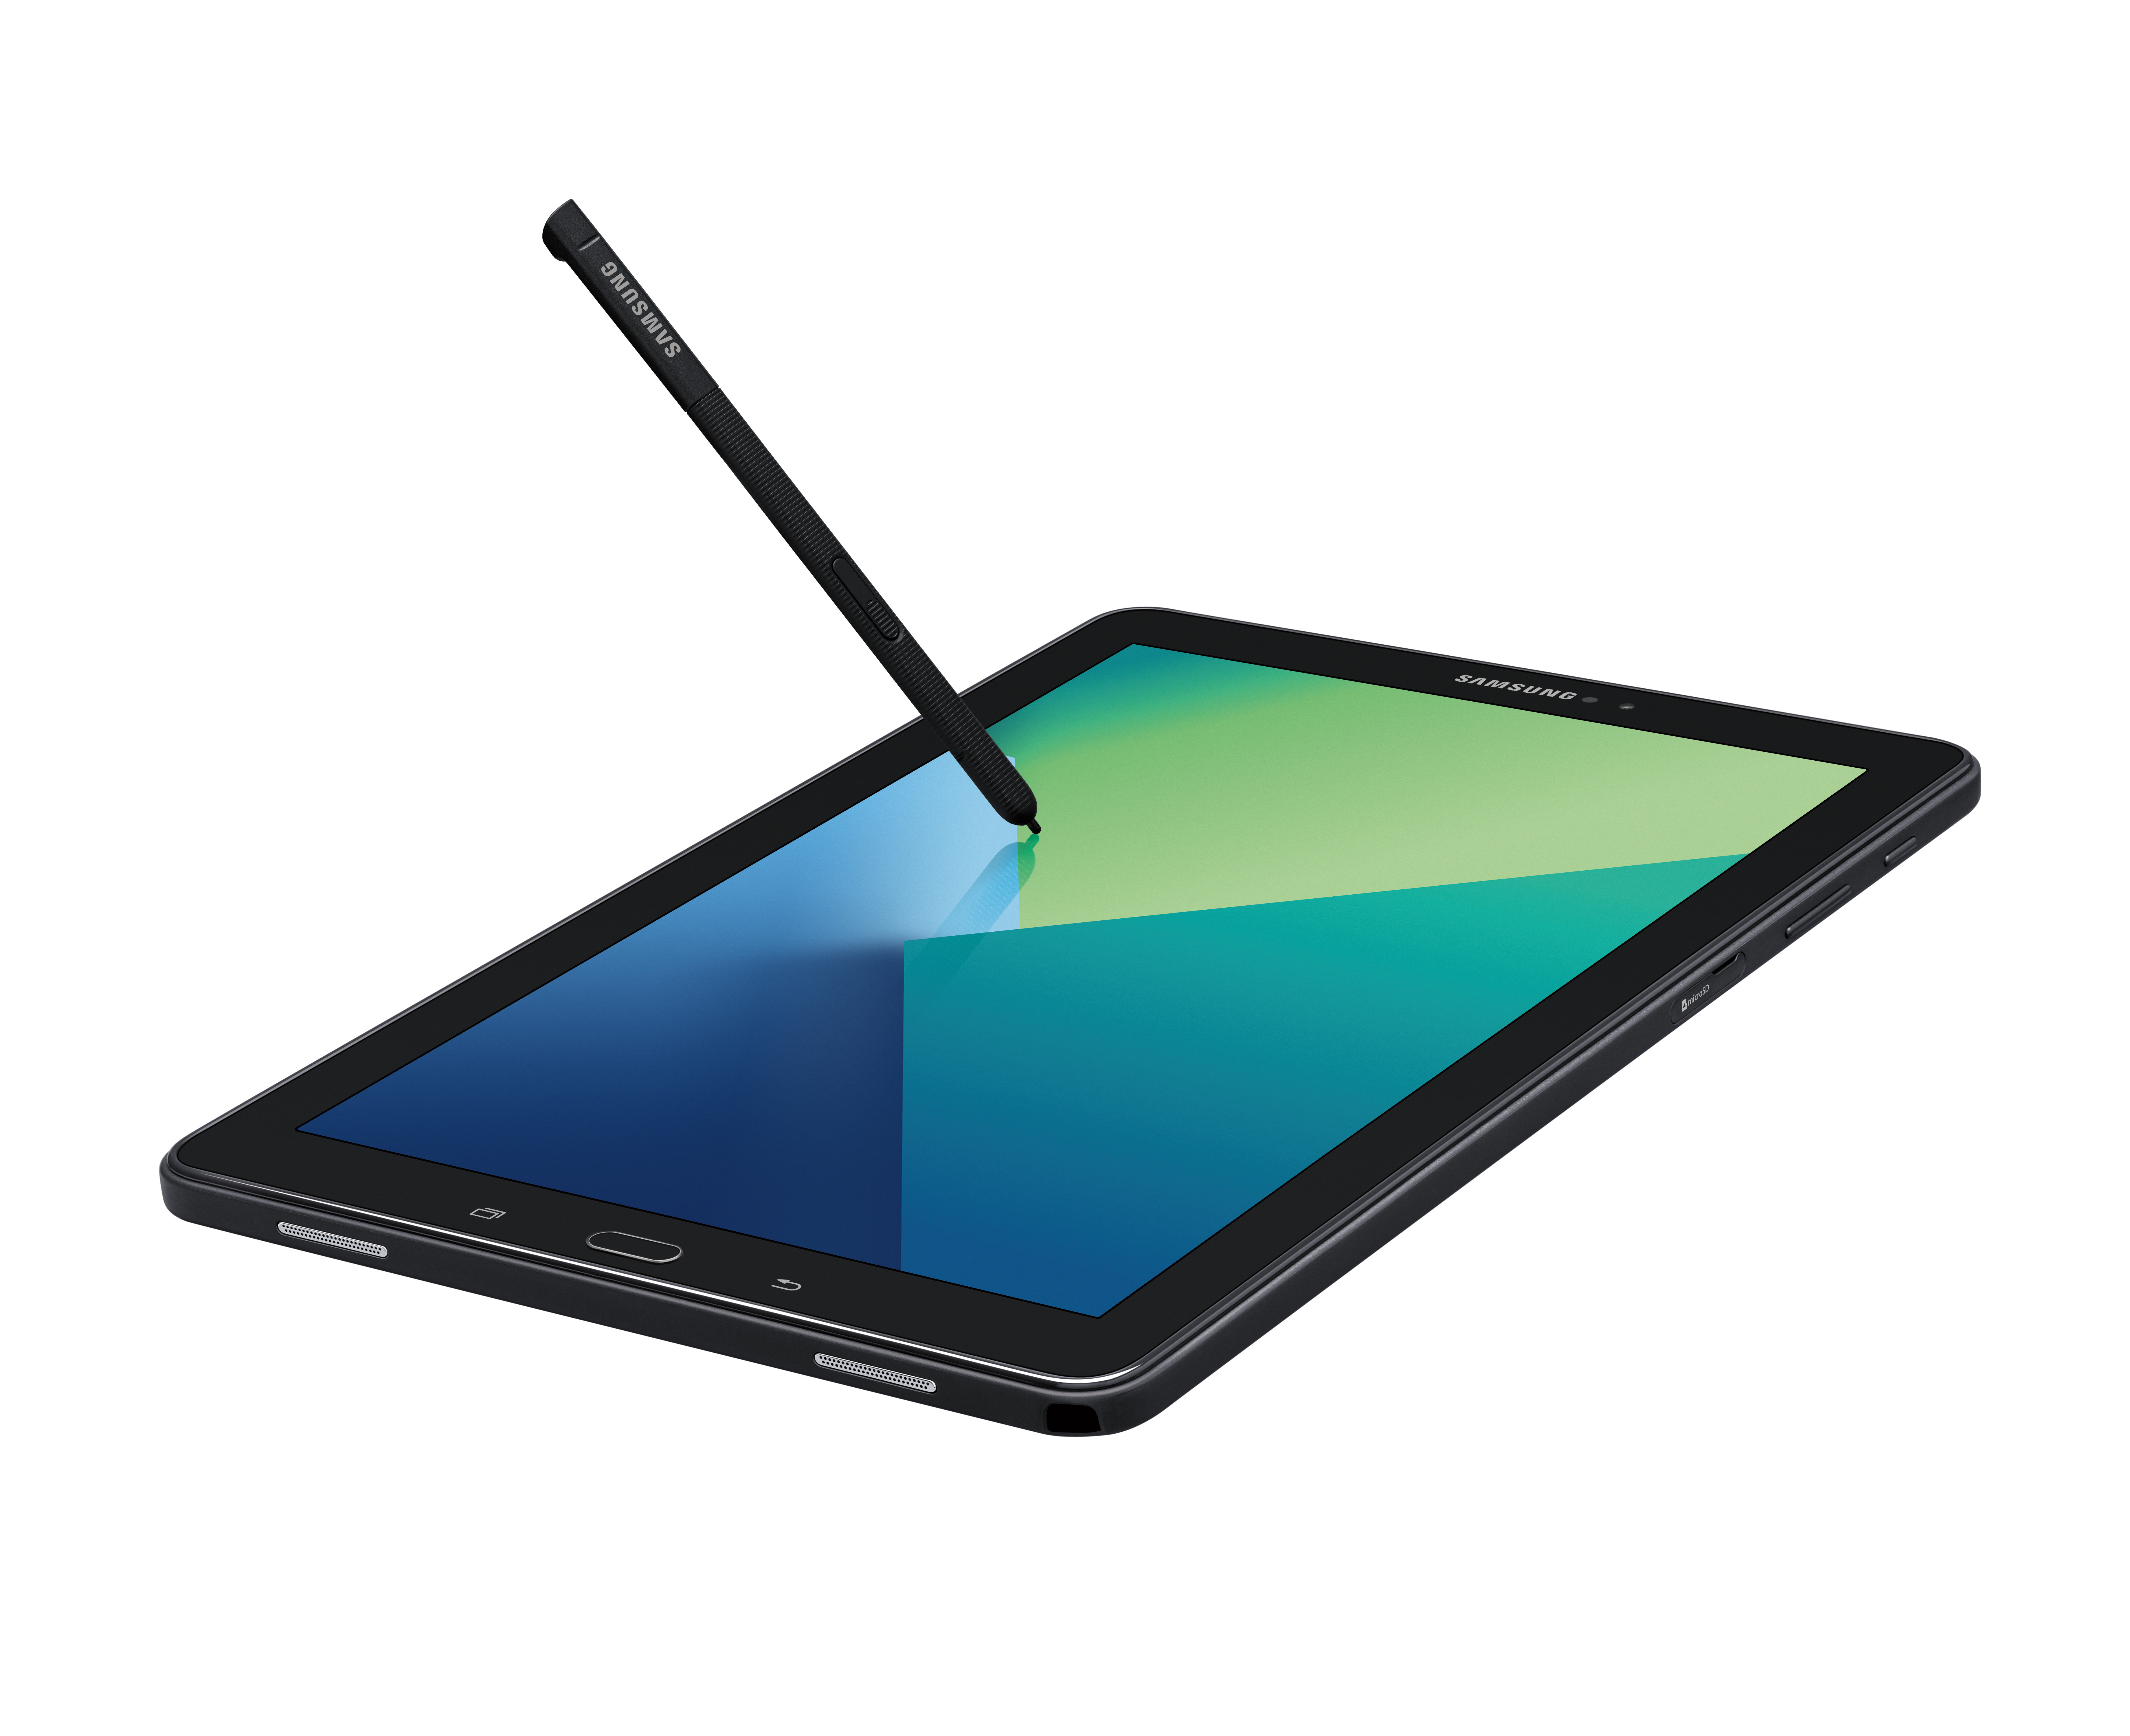 Samsung Galaxy Tab A 10.1-inch S Pen (2016) review: Yet another Samsung tablet -- but this one the S Pen CNET